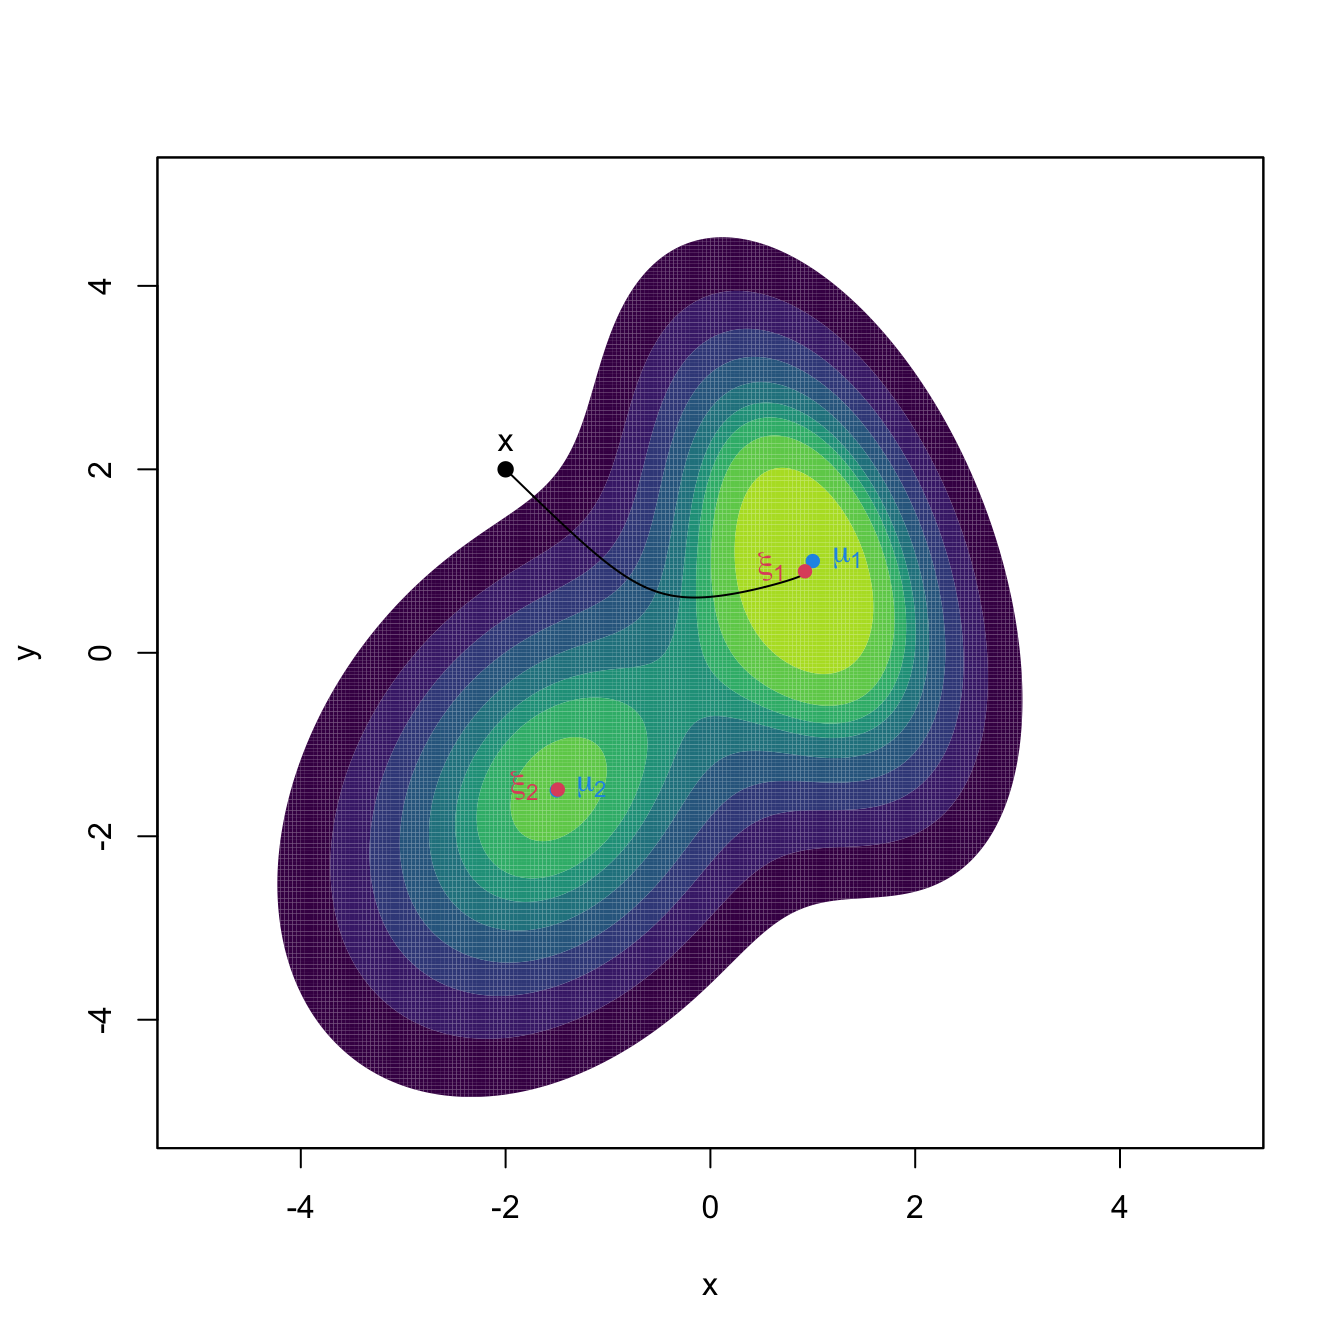 The curve \(\boldsymbol{\phi}_{\mathbf{x}}\) computed by the Euler method, in black. The population density is the mixture of bivariate normals \(w\phi_{\boldsymbol{\Sigma}_1}(\cdot-\boldsymbol{\mu}_1)+(1-w)\phi_{\boldsymbol{\Sigma}_2}(\cdot-\boldsymbol{\mu}_2),\) where \(\boldsymbol{\mu}_1=(1,1)',\) \(\boldsymbol{\mu}_2=(-1.5,-1.5)',\) \(\boldsymbol{\Sigma}_1=(1, -0.75; -0.75, 3),\) \(\boldsymbol{\Sigma}_2=(2, 0.75; 0.75, 3),\) and \(w=0.45.\) The component means \(\boldsymbol{\mu}_1\) and \(\boldsymbol{\mu}_2\) are shown in blue, whereas the two modes \(\boldsymbol{\xi}_1\) and \(\boldsymbol{\xi}_2\) of the density are represented in red. Note that the modes and the component means may be different.